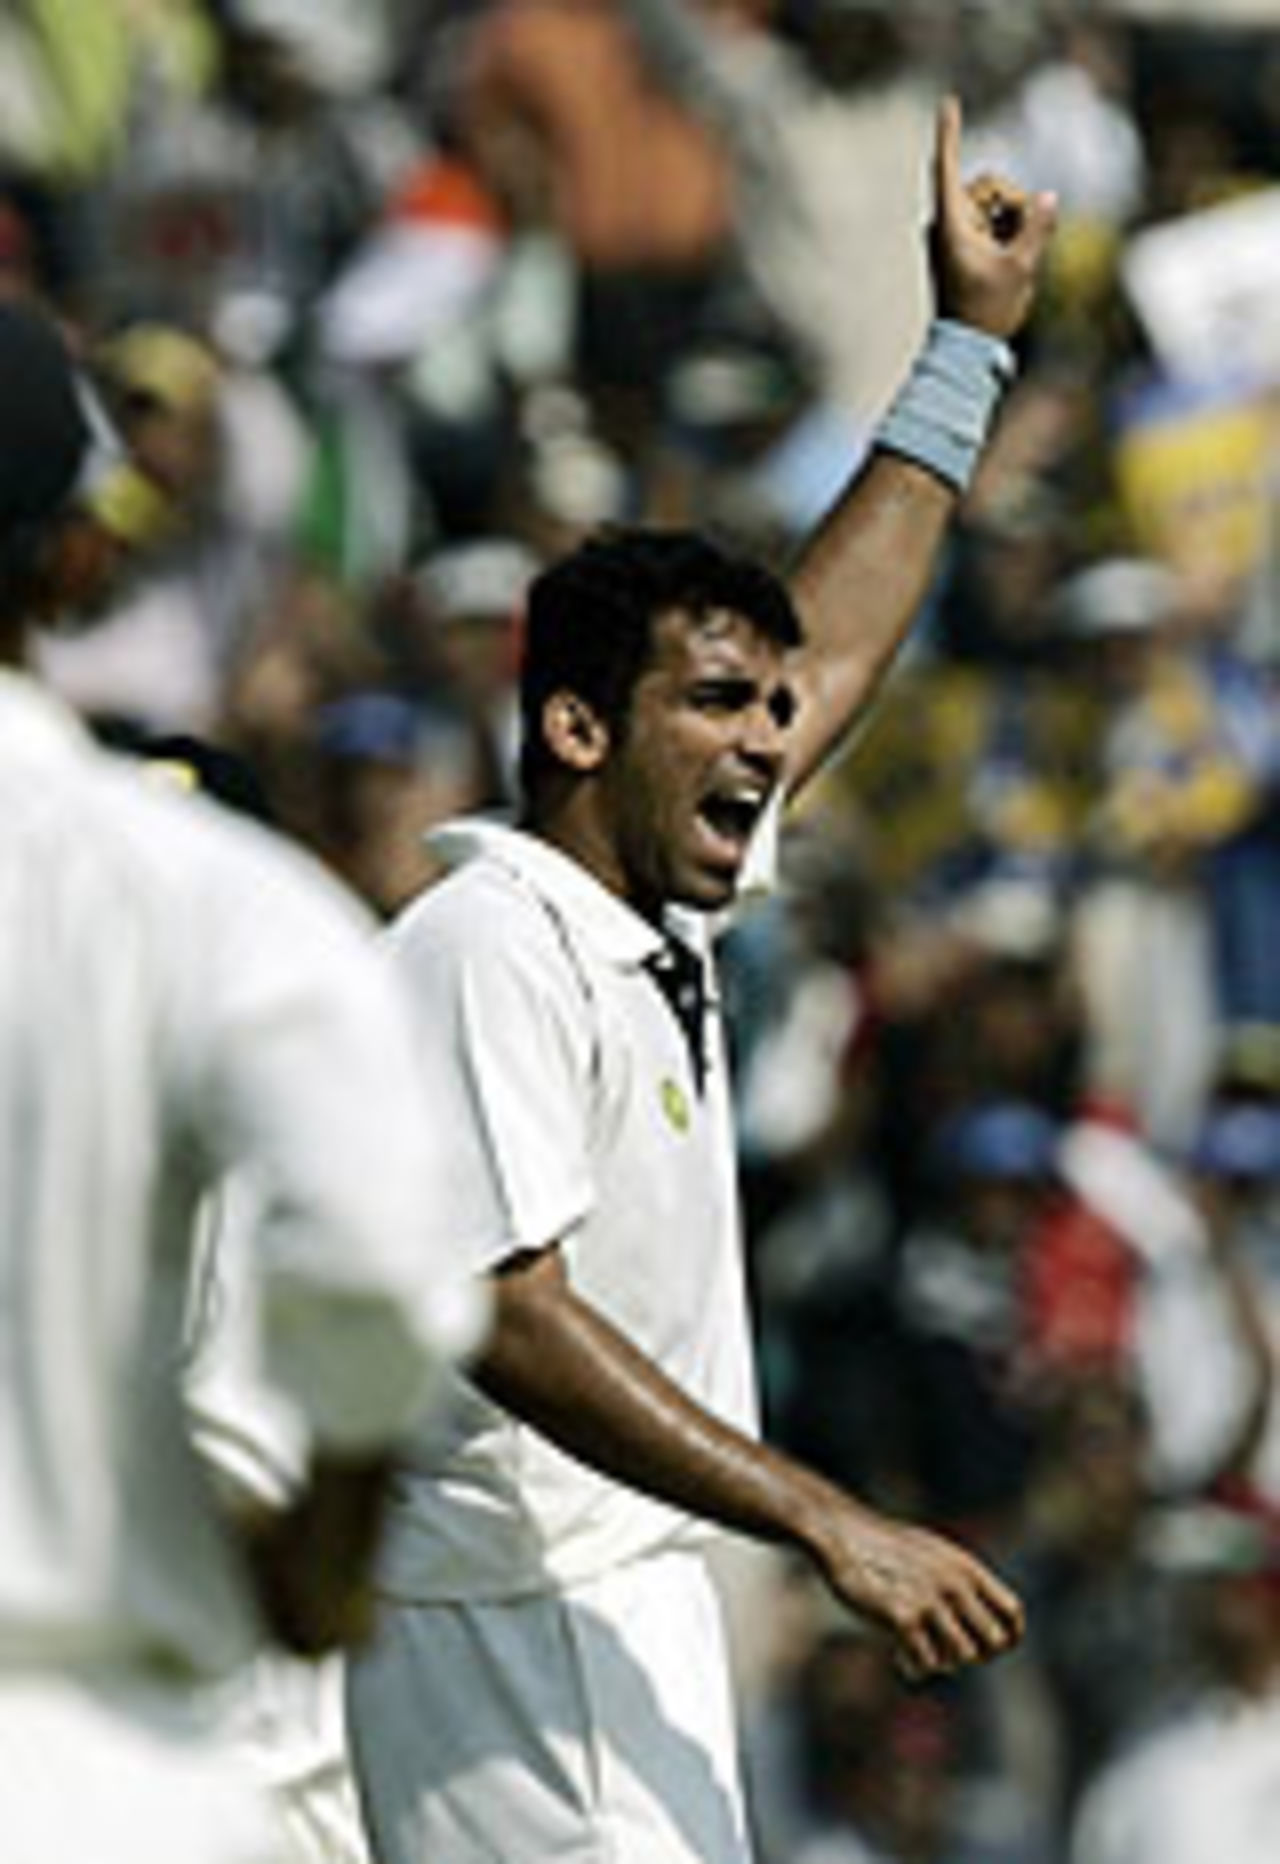 Zaheer Khan appeals successfully, India v Pakistan, 1st Test, Mohali, March 8, 2005